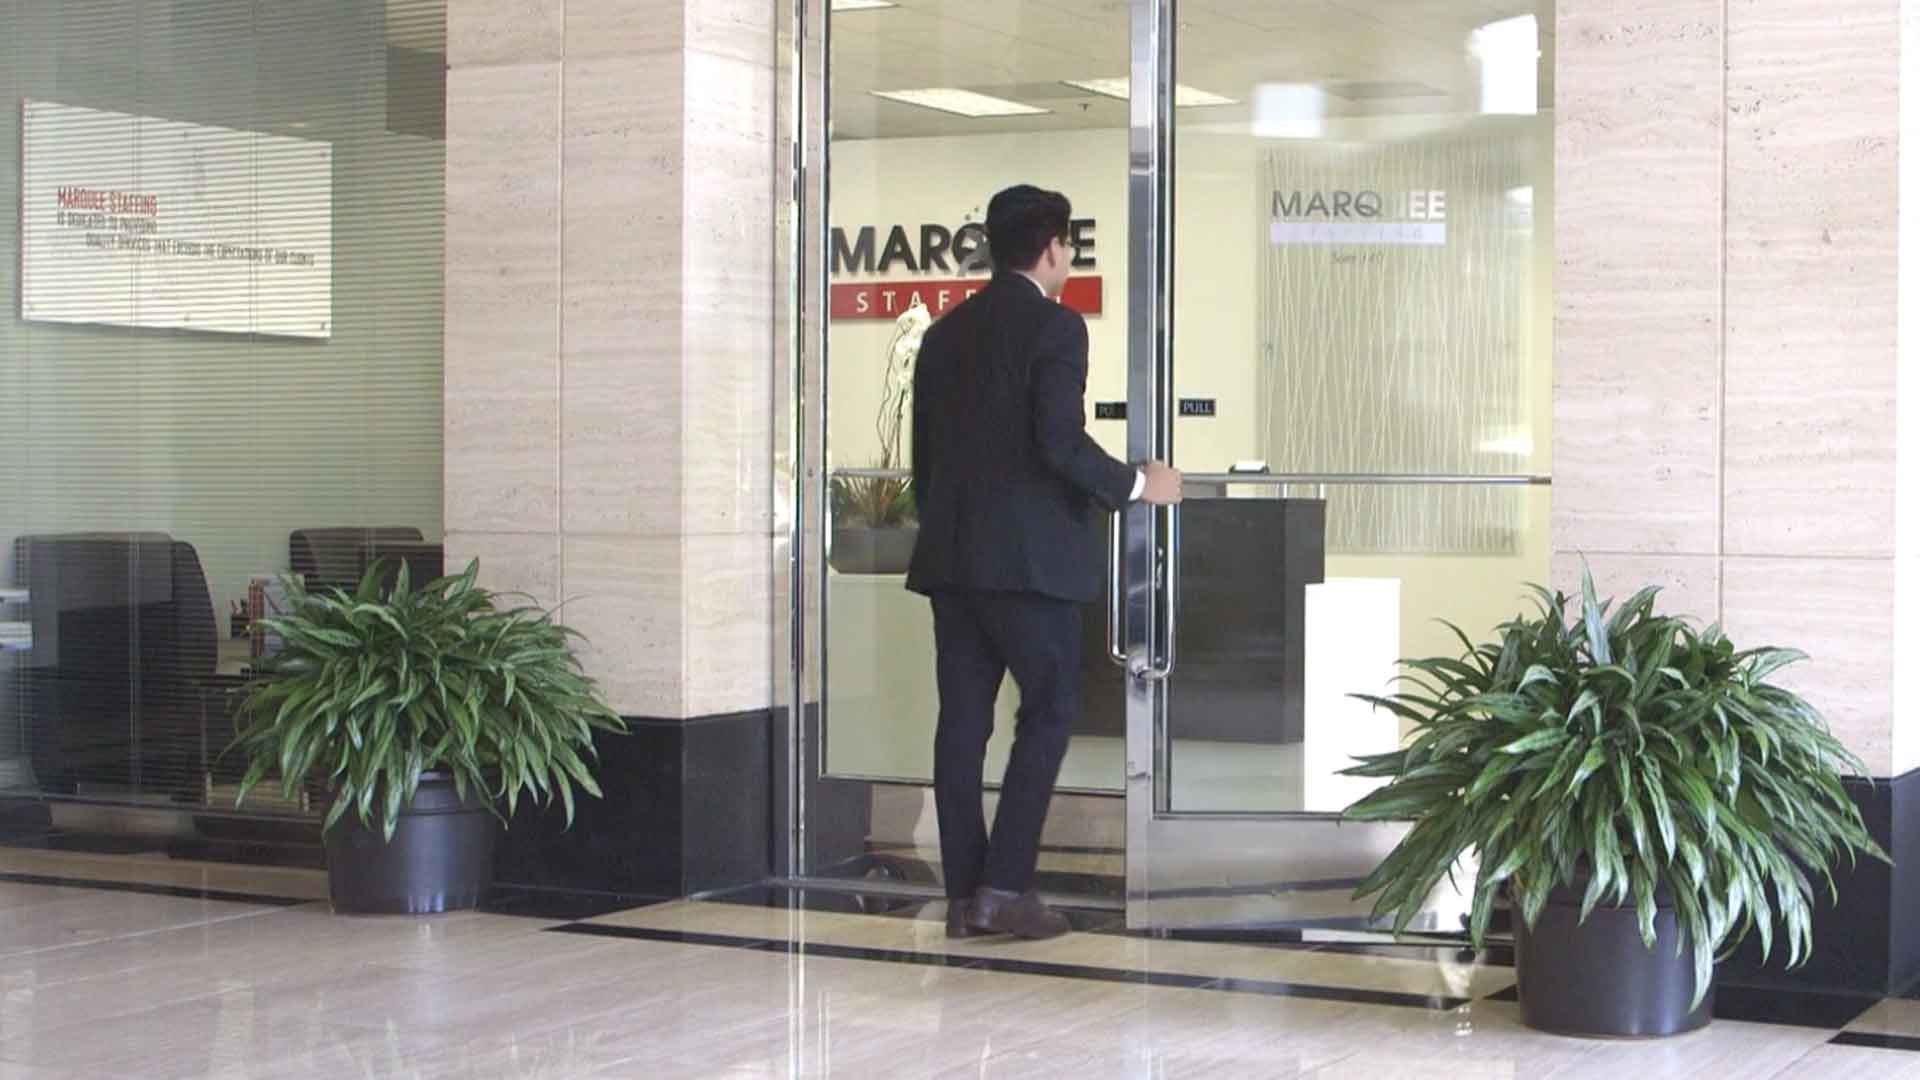 Marquee Staffing - Corporate video